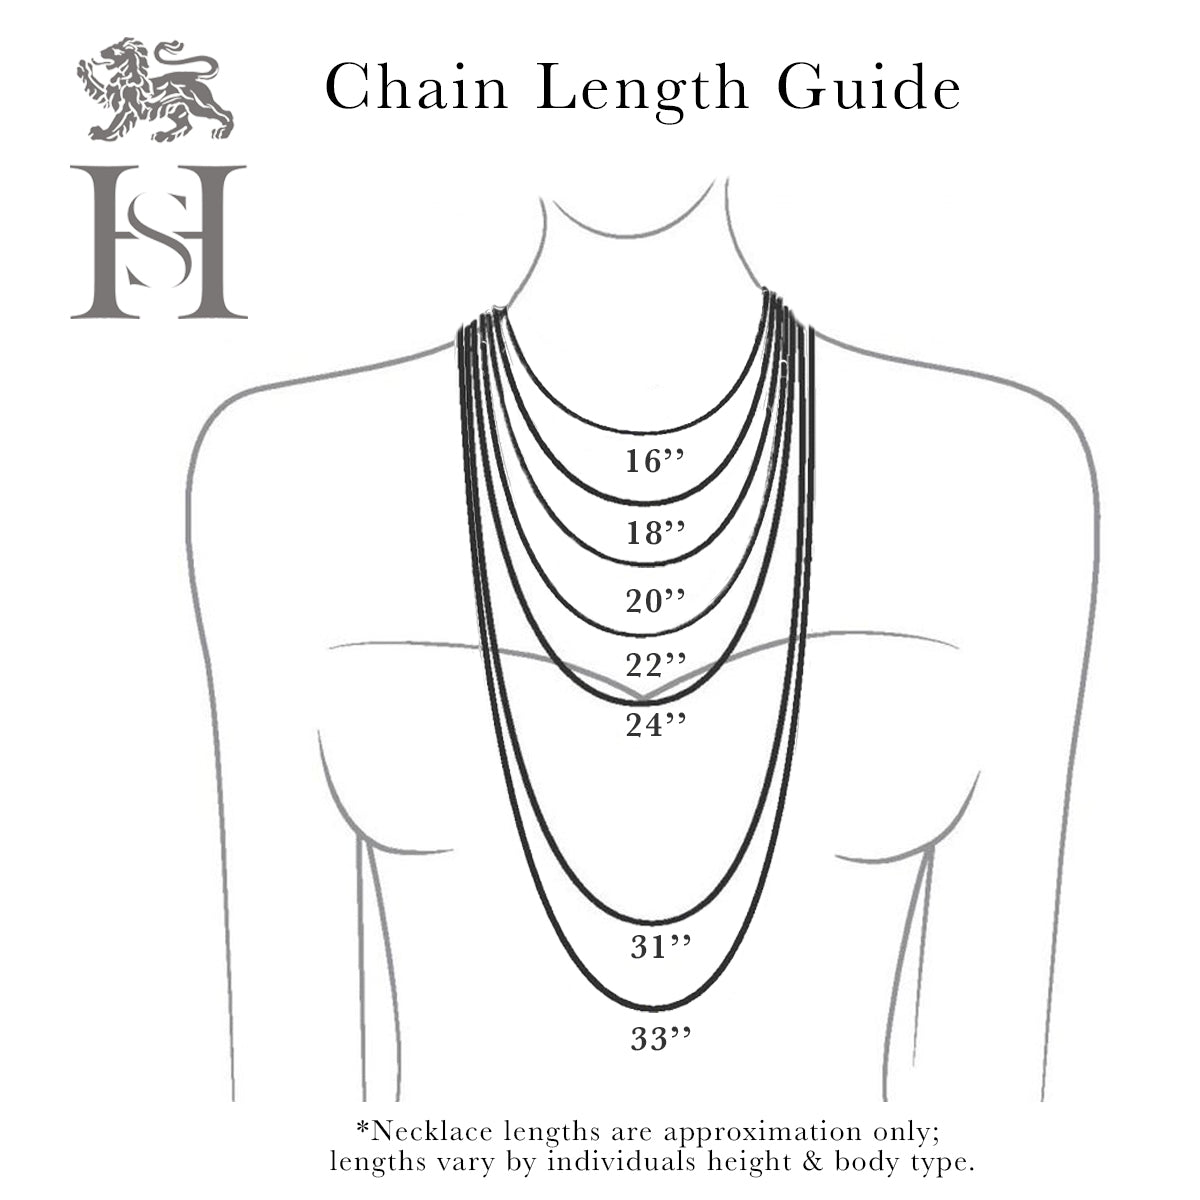 Ladies chain lengths guide